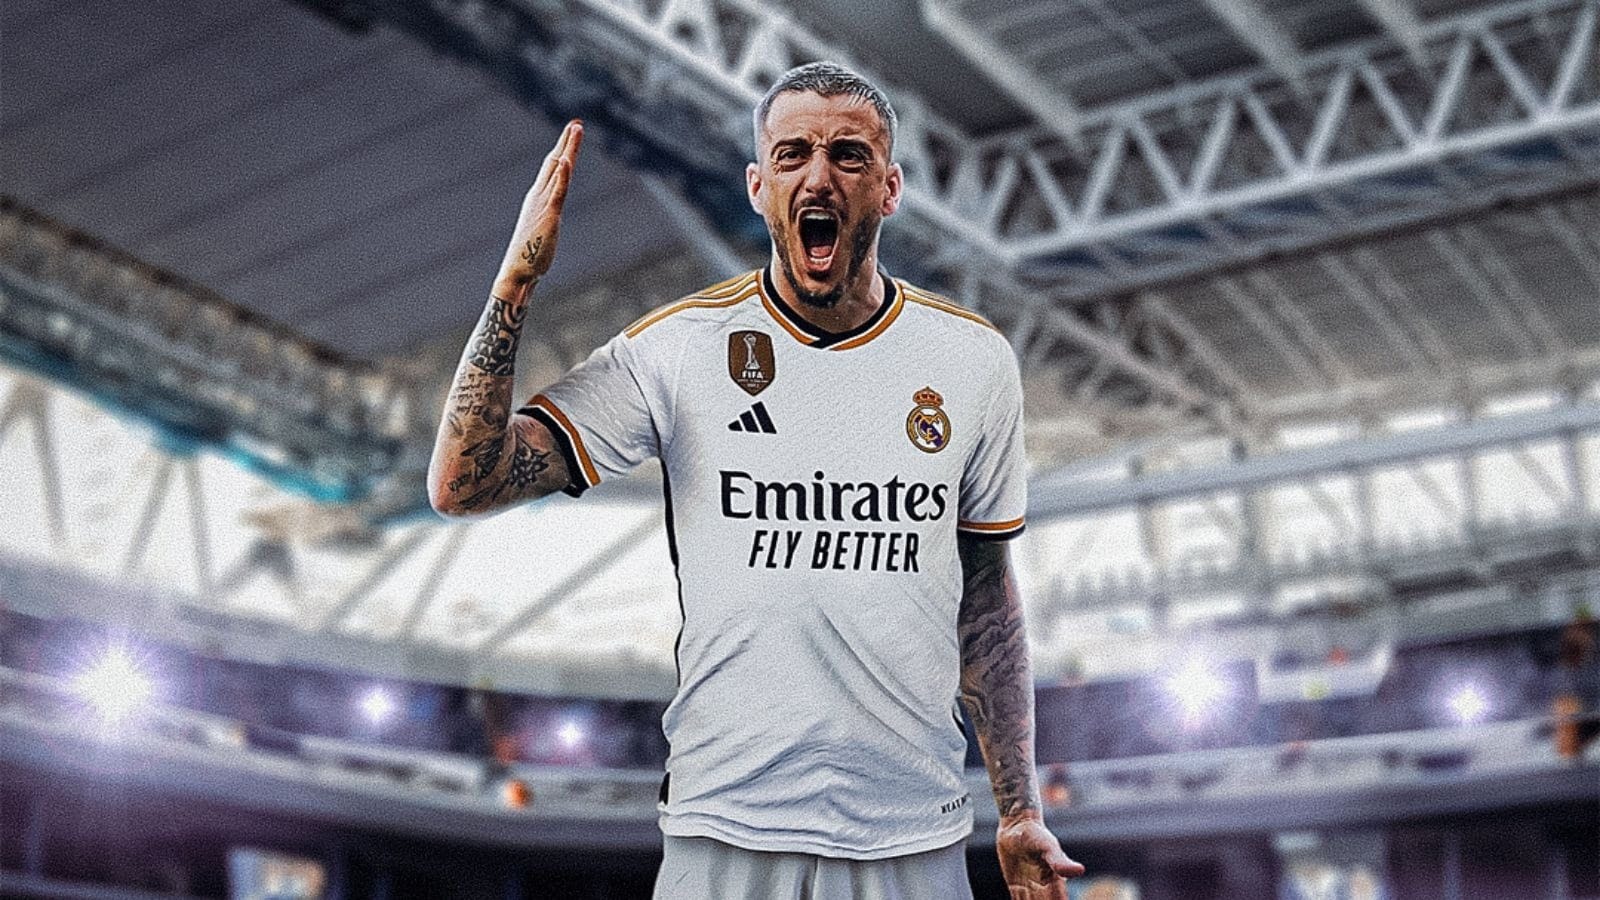  The image shows a photo of Spanish professional footballer, Joselu, who plays as a striker for Real Madrid, celebrating a goal against Manchester United.